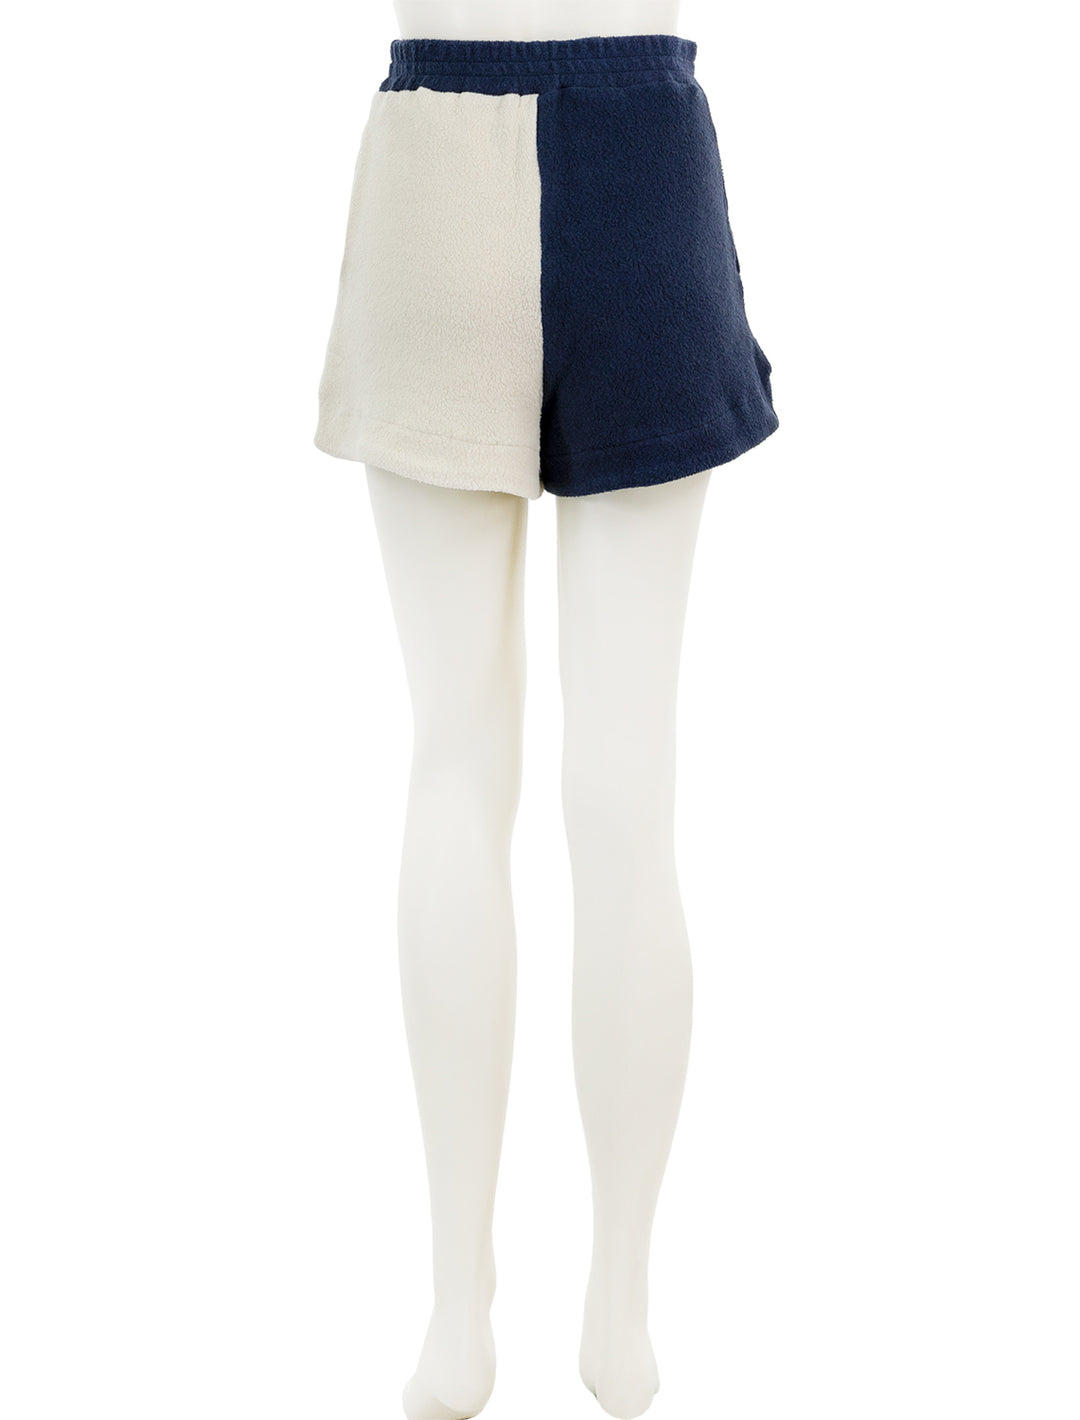 Back view of Sundry's sherpa pull-on shorts in cream and navy.